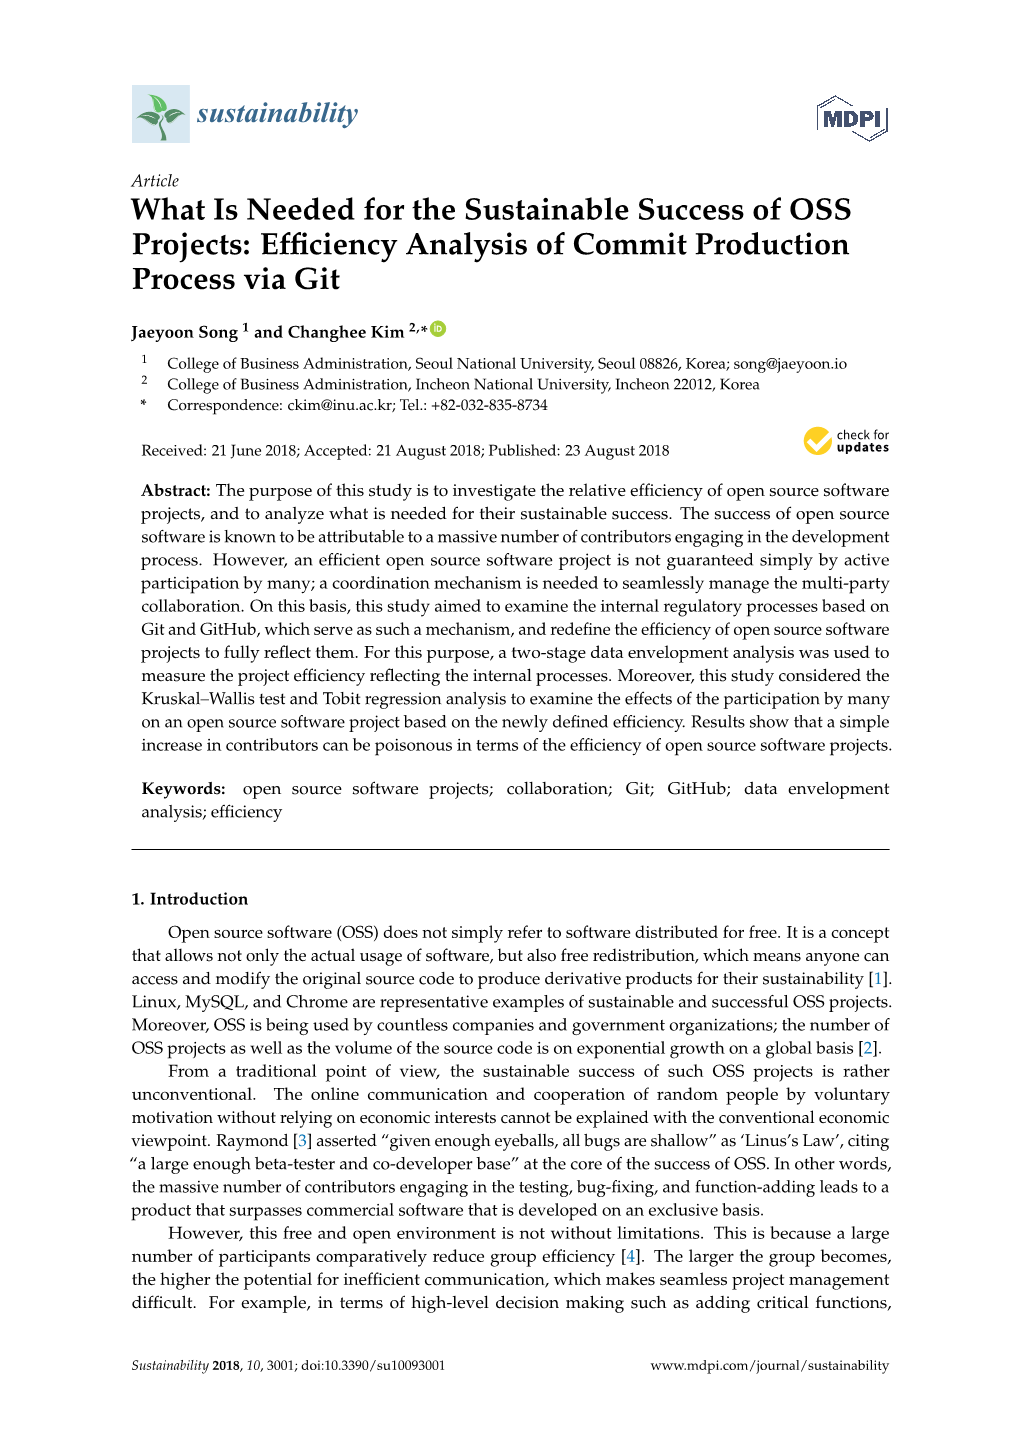 Efficiency Analysis of Commit Production Process Via